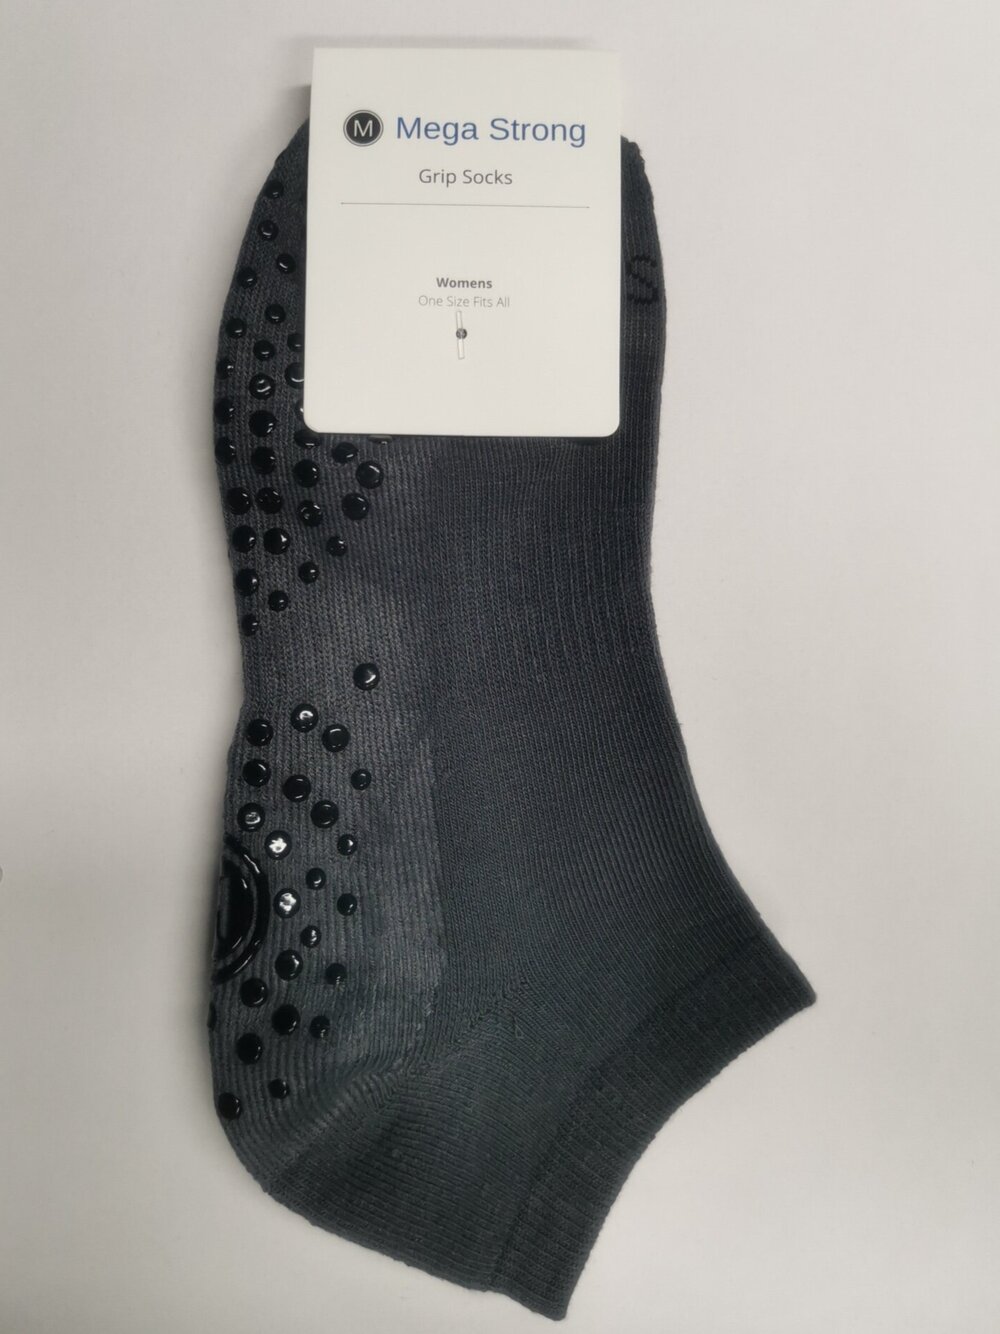 MEGA STRONG Women's one size fits all GRIP SOCKS — The Lagree Method